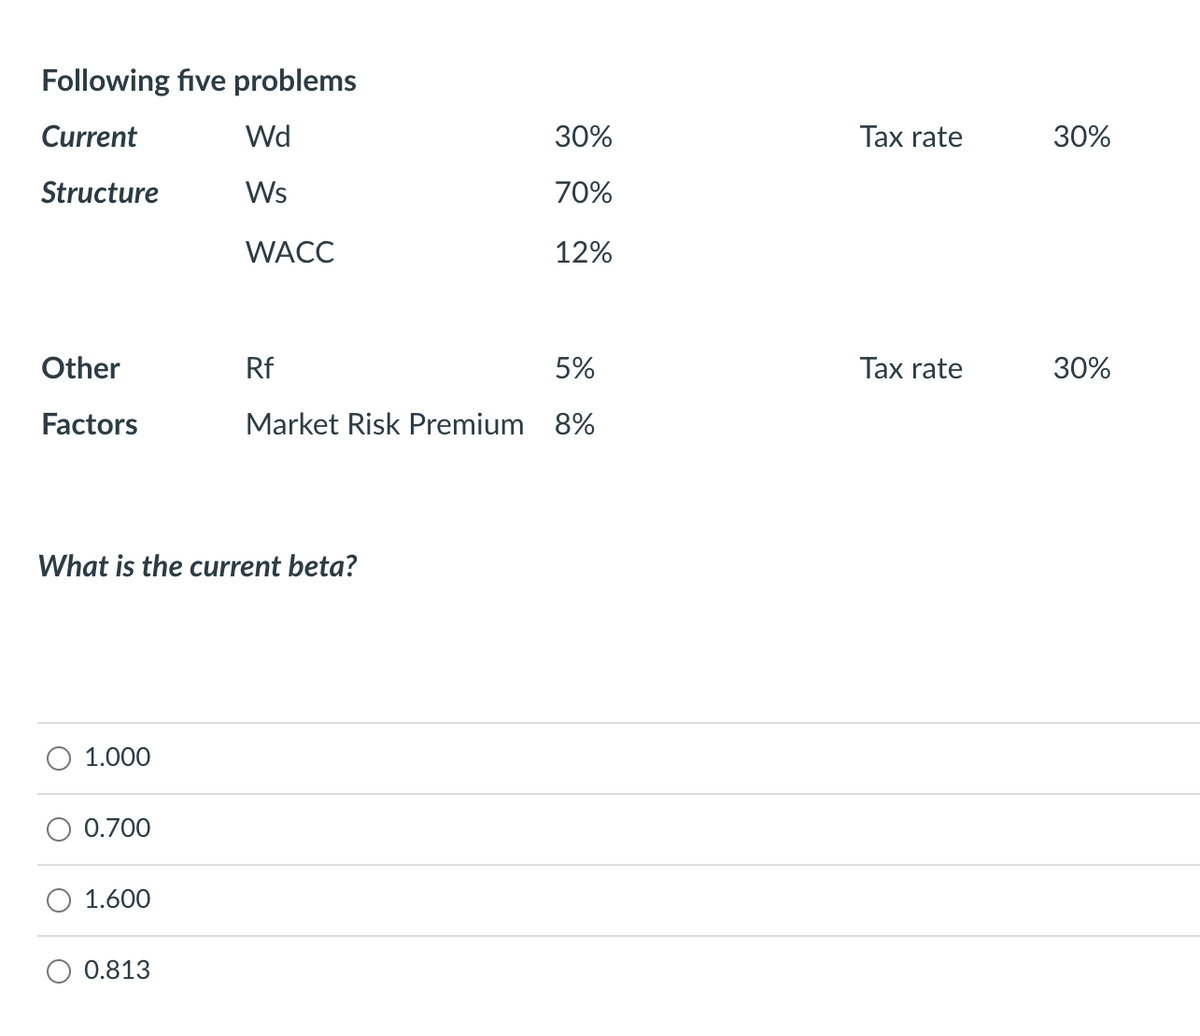 Following five problems
Current
Wd
Structure
Ws
Other
Factors
1.000
0.700
What is the current beta?
1.600
WACC
0.813
Rf
5%
Market Risk Premium 8%
30%
70%
12%
Tax rate
Tax rate
30%
30%